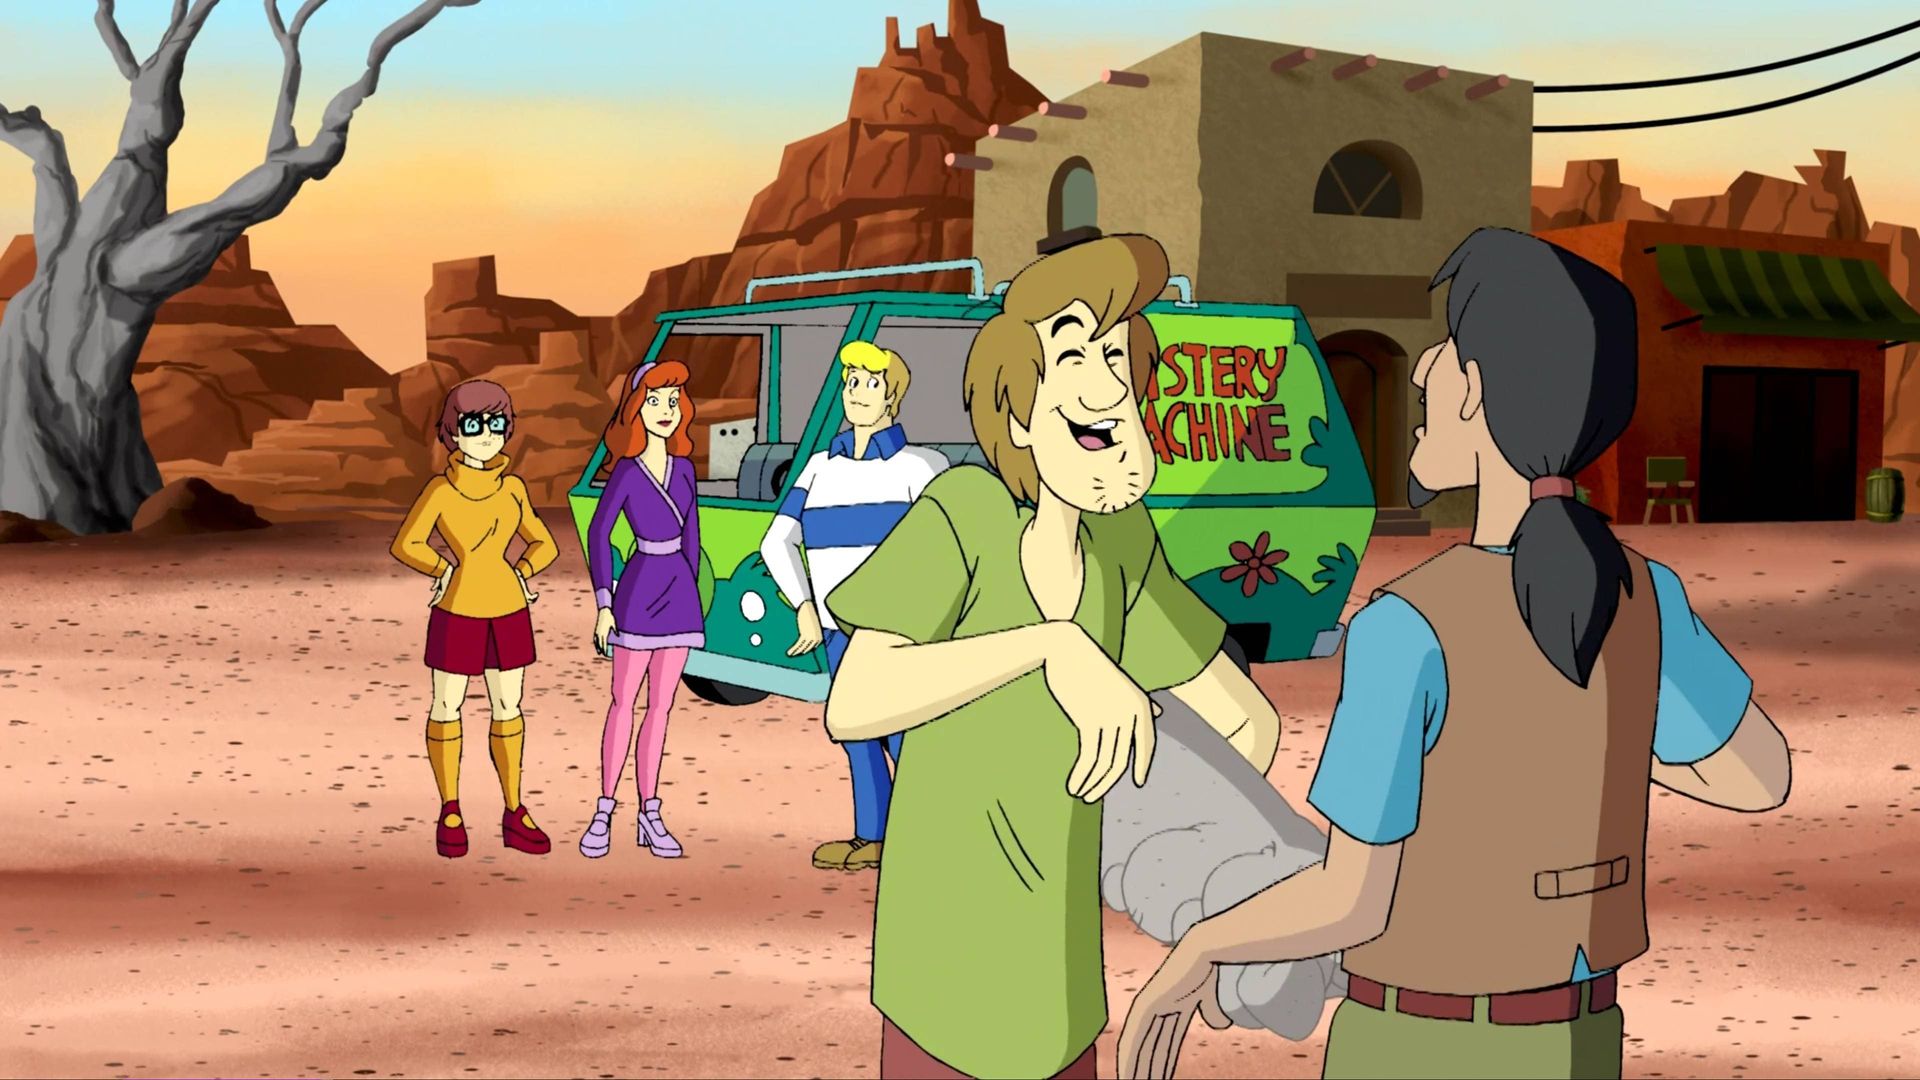 What's New, Scooby-Doo? background